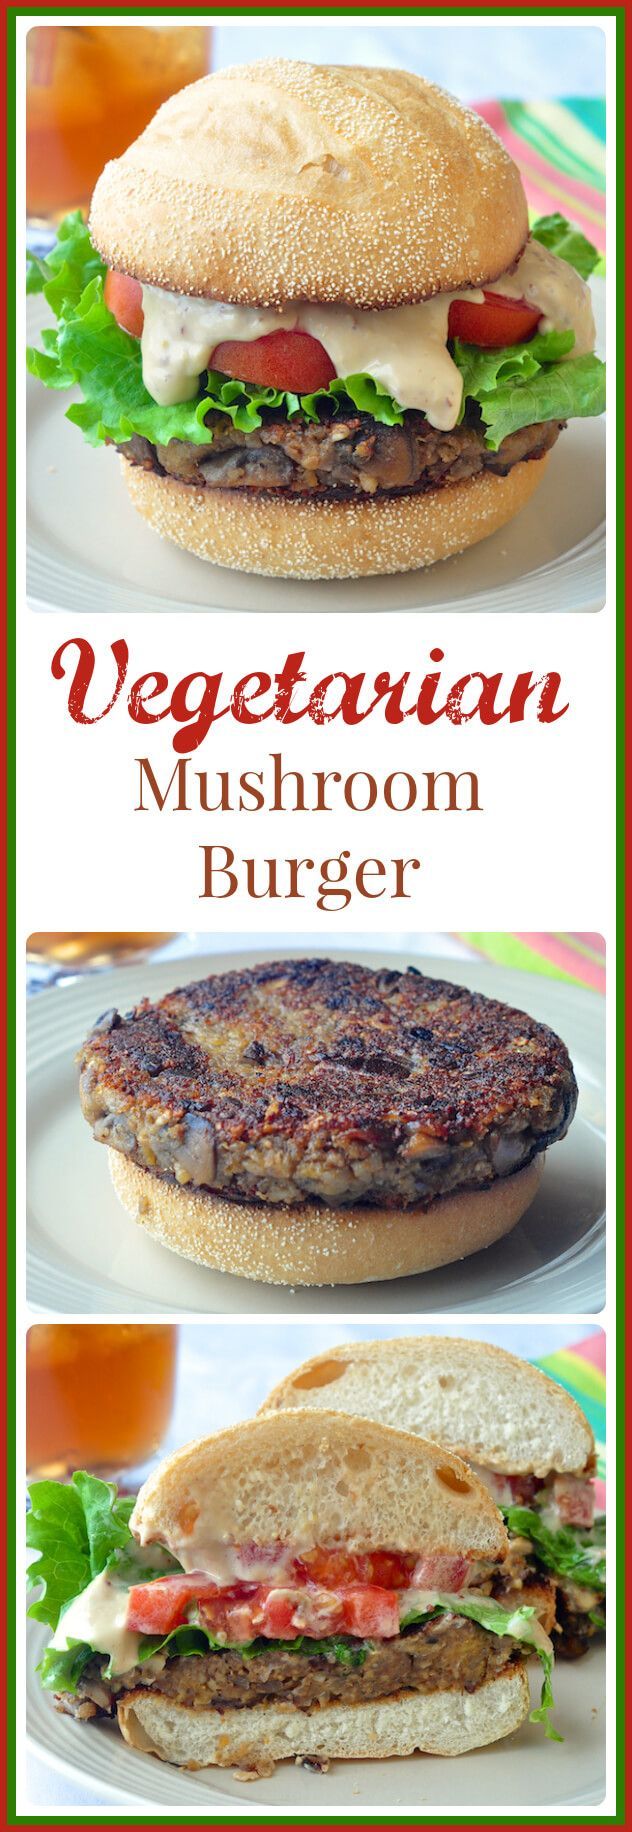 This vegetarian mushroom burger recipe is certainly not short on flavour. Make them as full sized burgers or even as sliders at